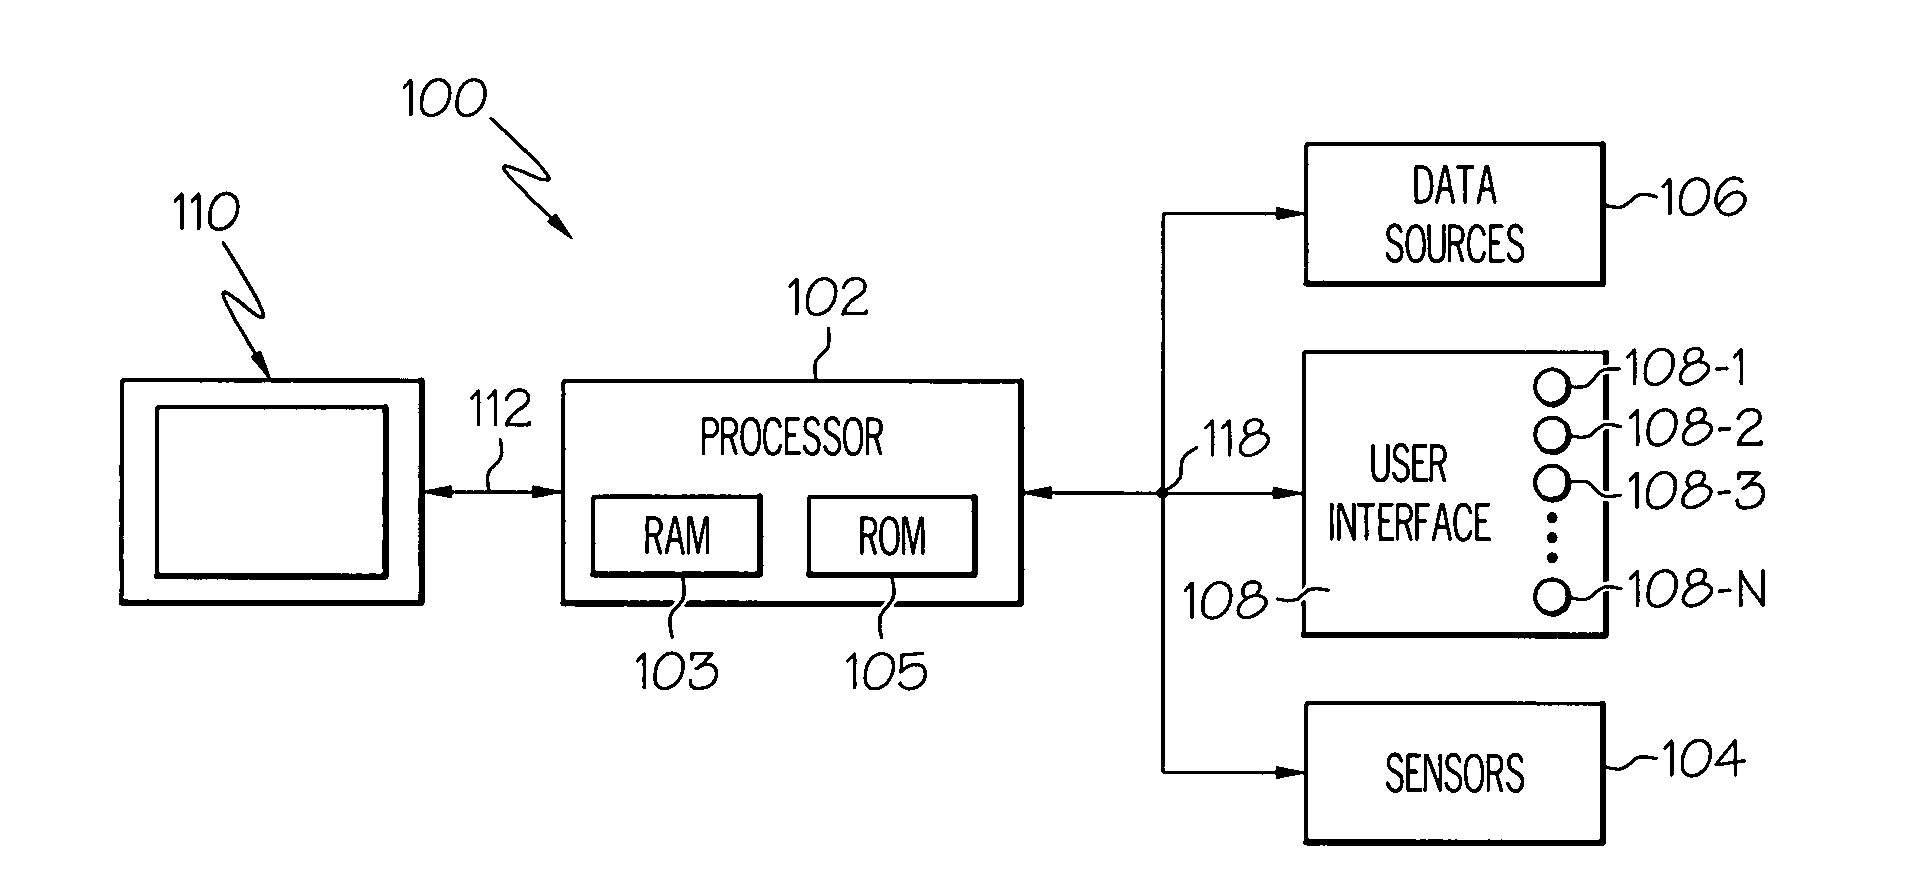 Altimeter setting display and storage system and method